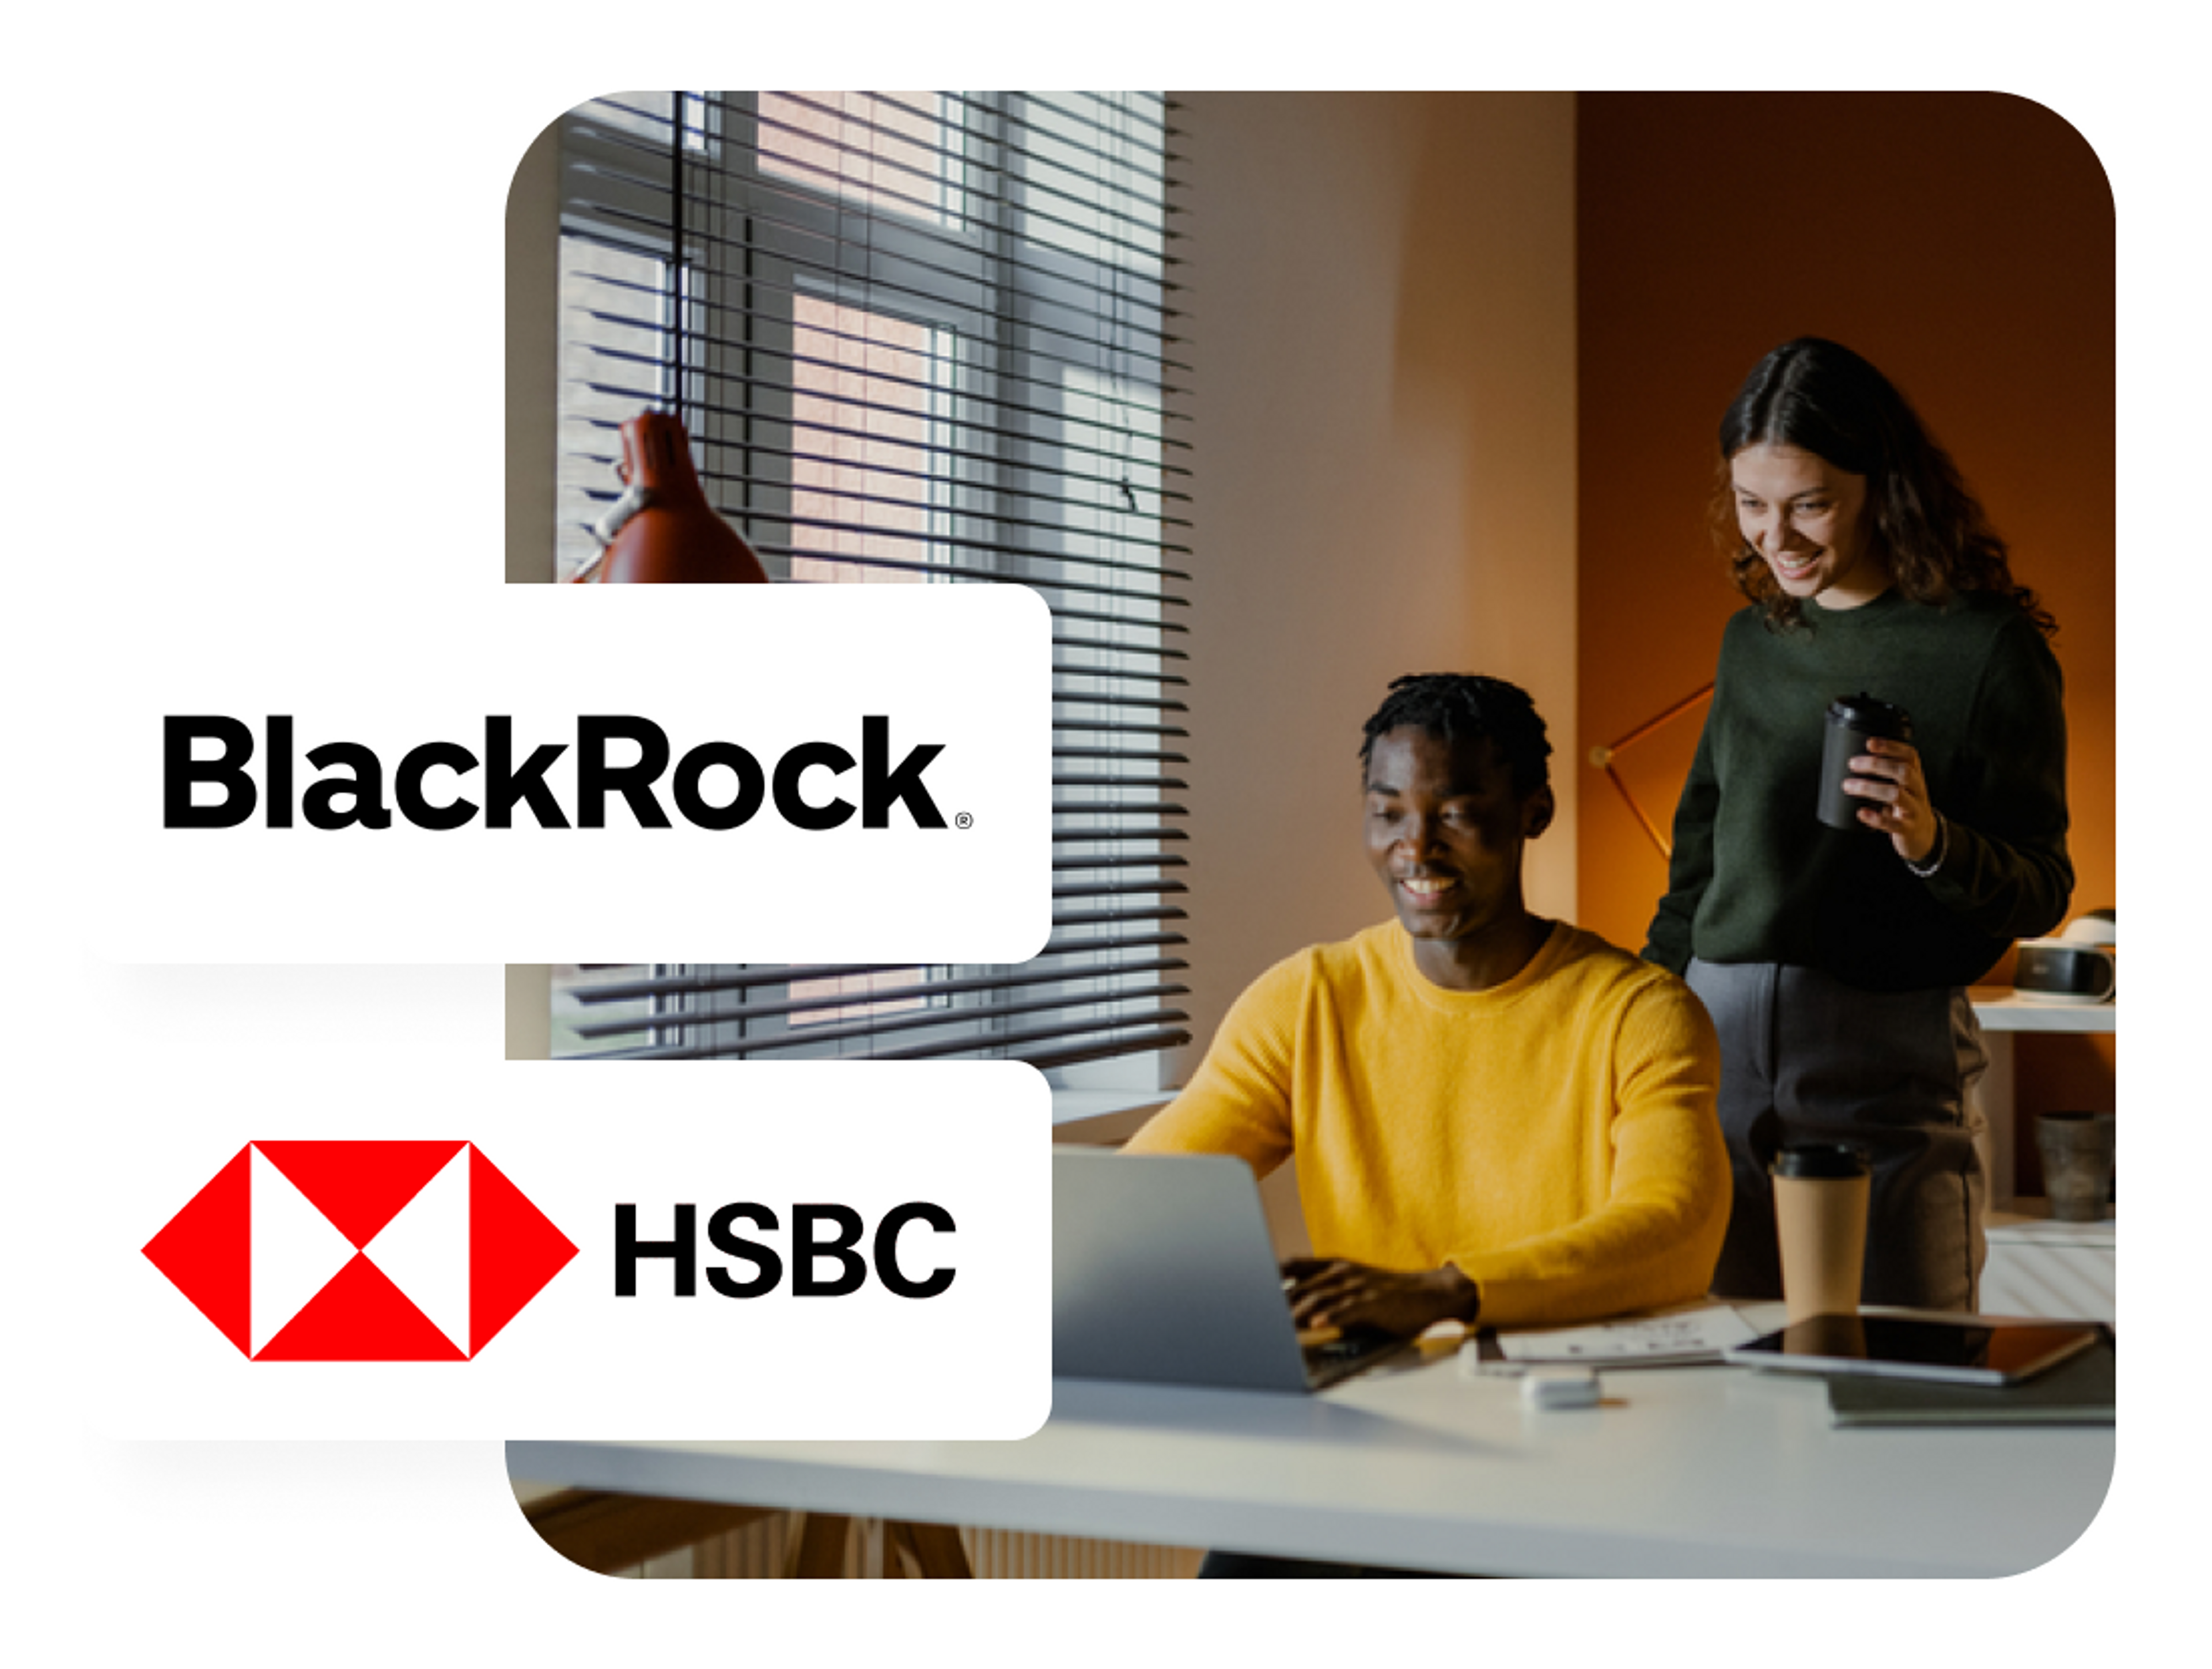 A photo of a man and a woman looking at a laptop screen and the BlackRock and HSBC logos